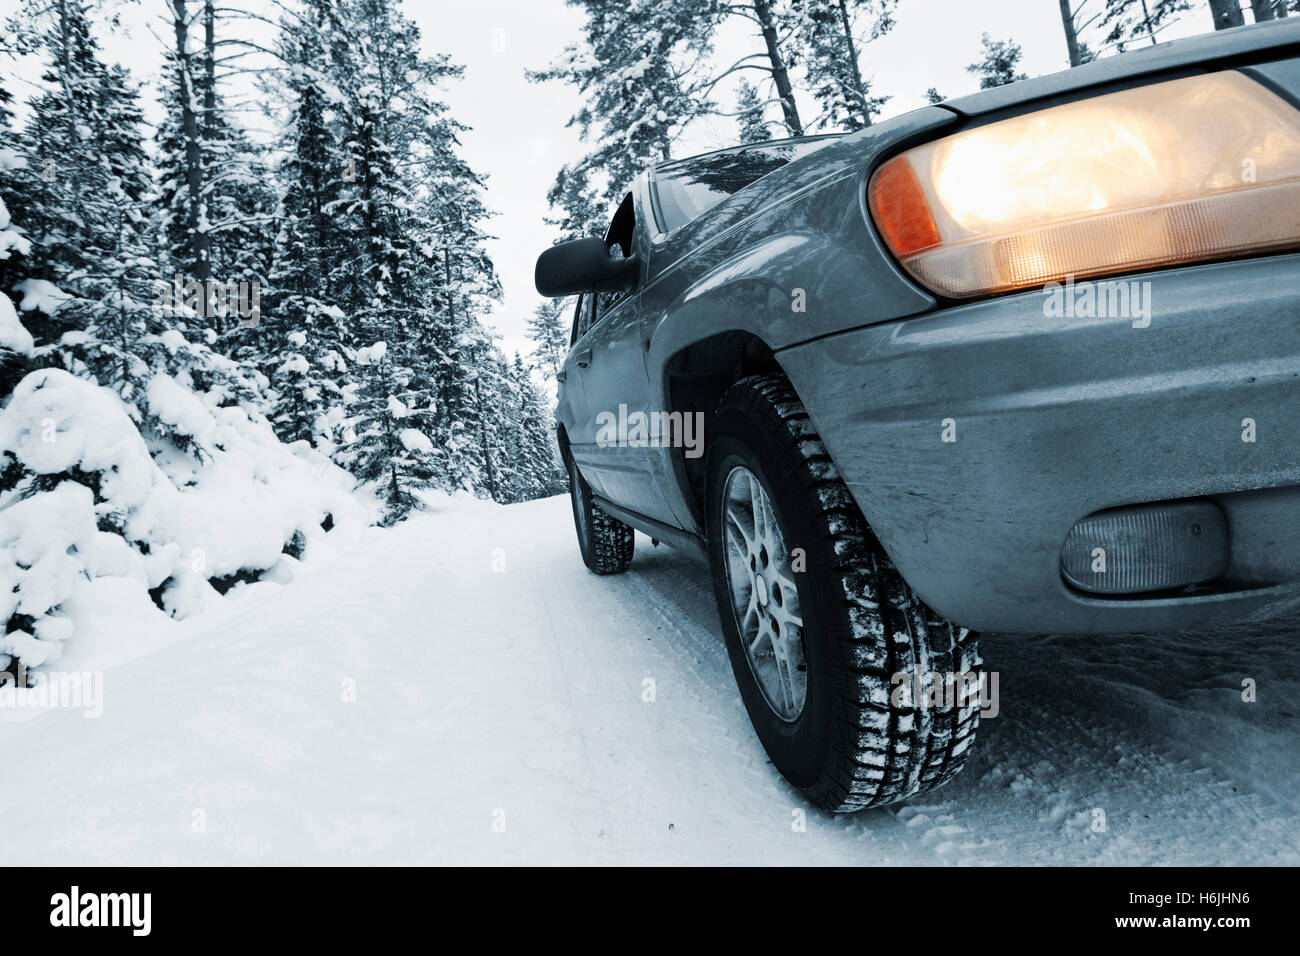 4x4, car driving in snowy and rough conditions Stock Photo